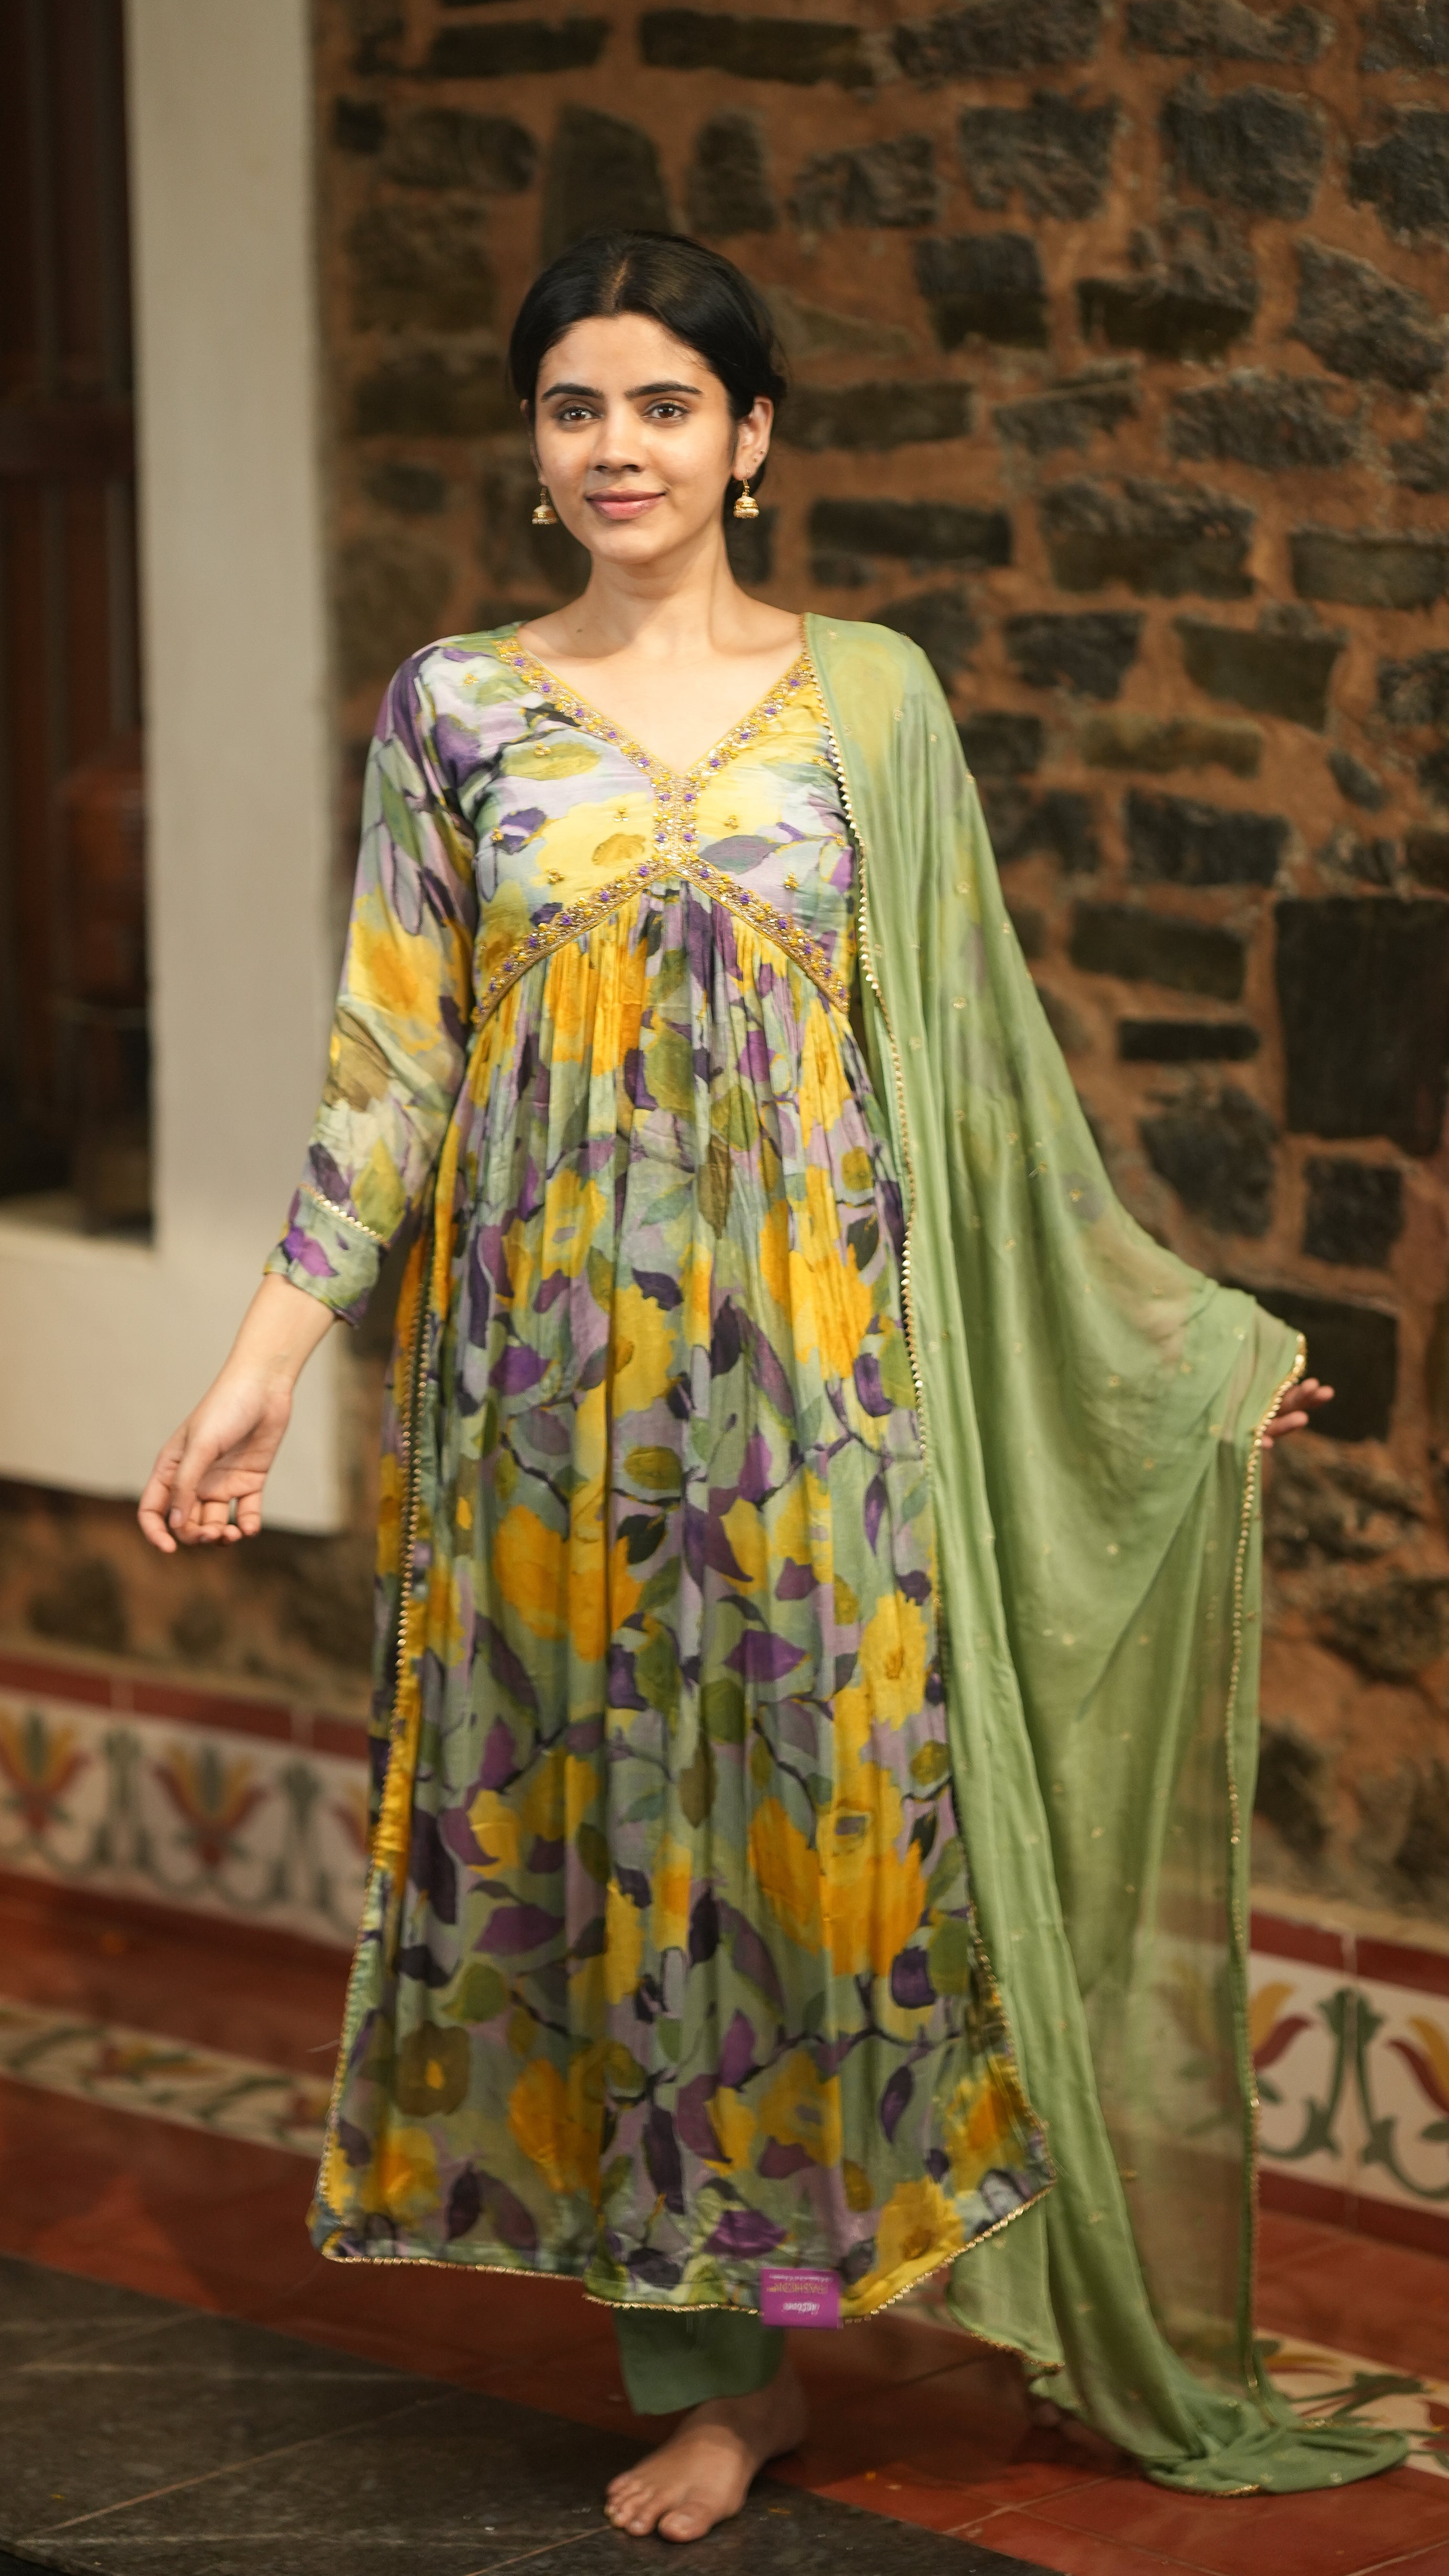 Rayon designer Kurti Pants dress for an ethnic look in summers - Shop  online women fashion, indo-western, ethnic wear, sari, suits, kurtis,  watches, gifts.